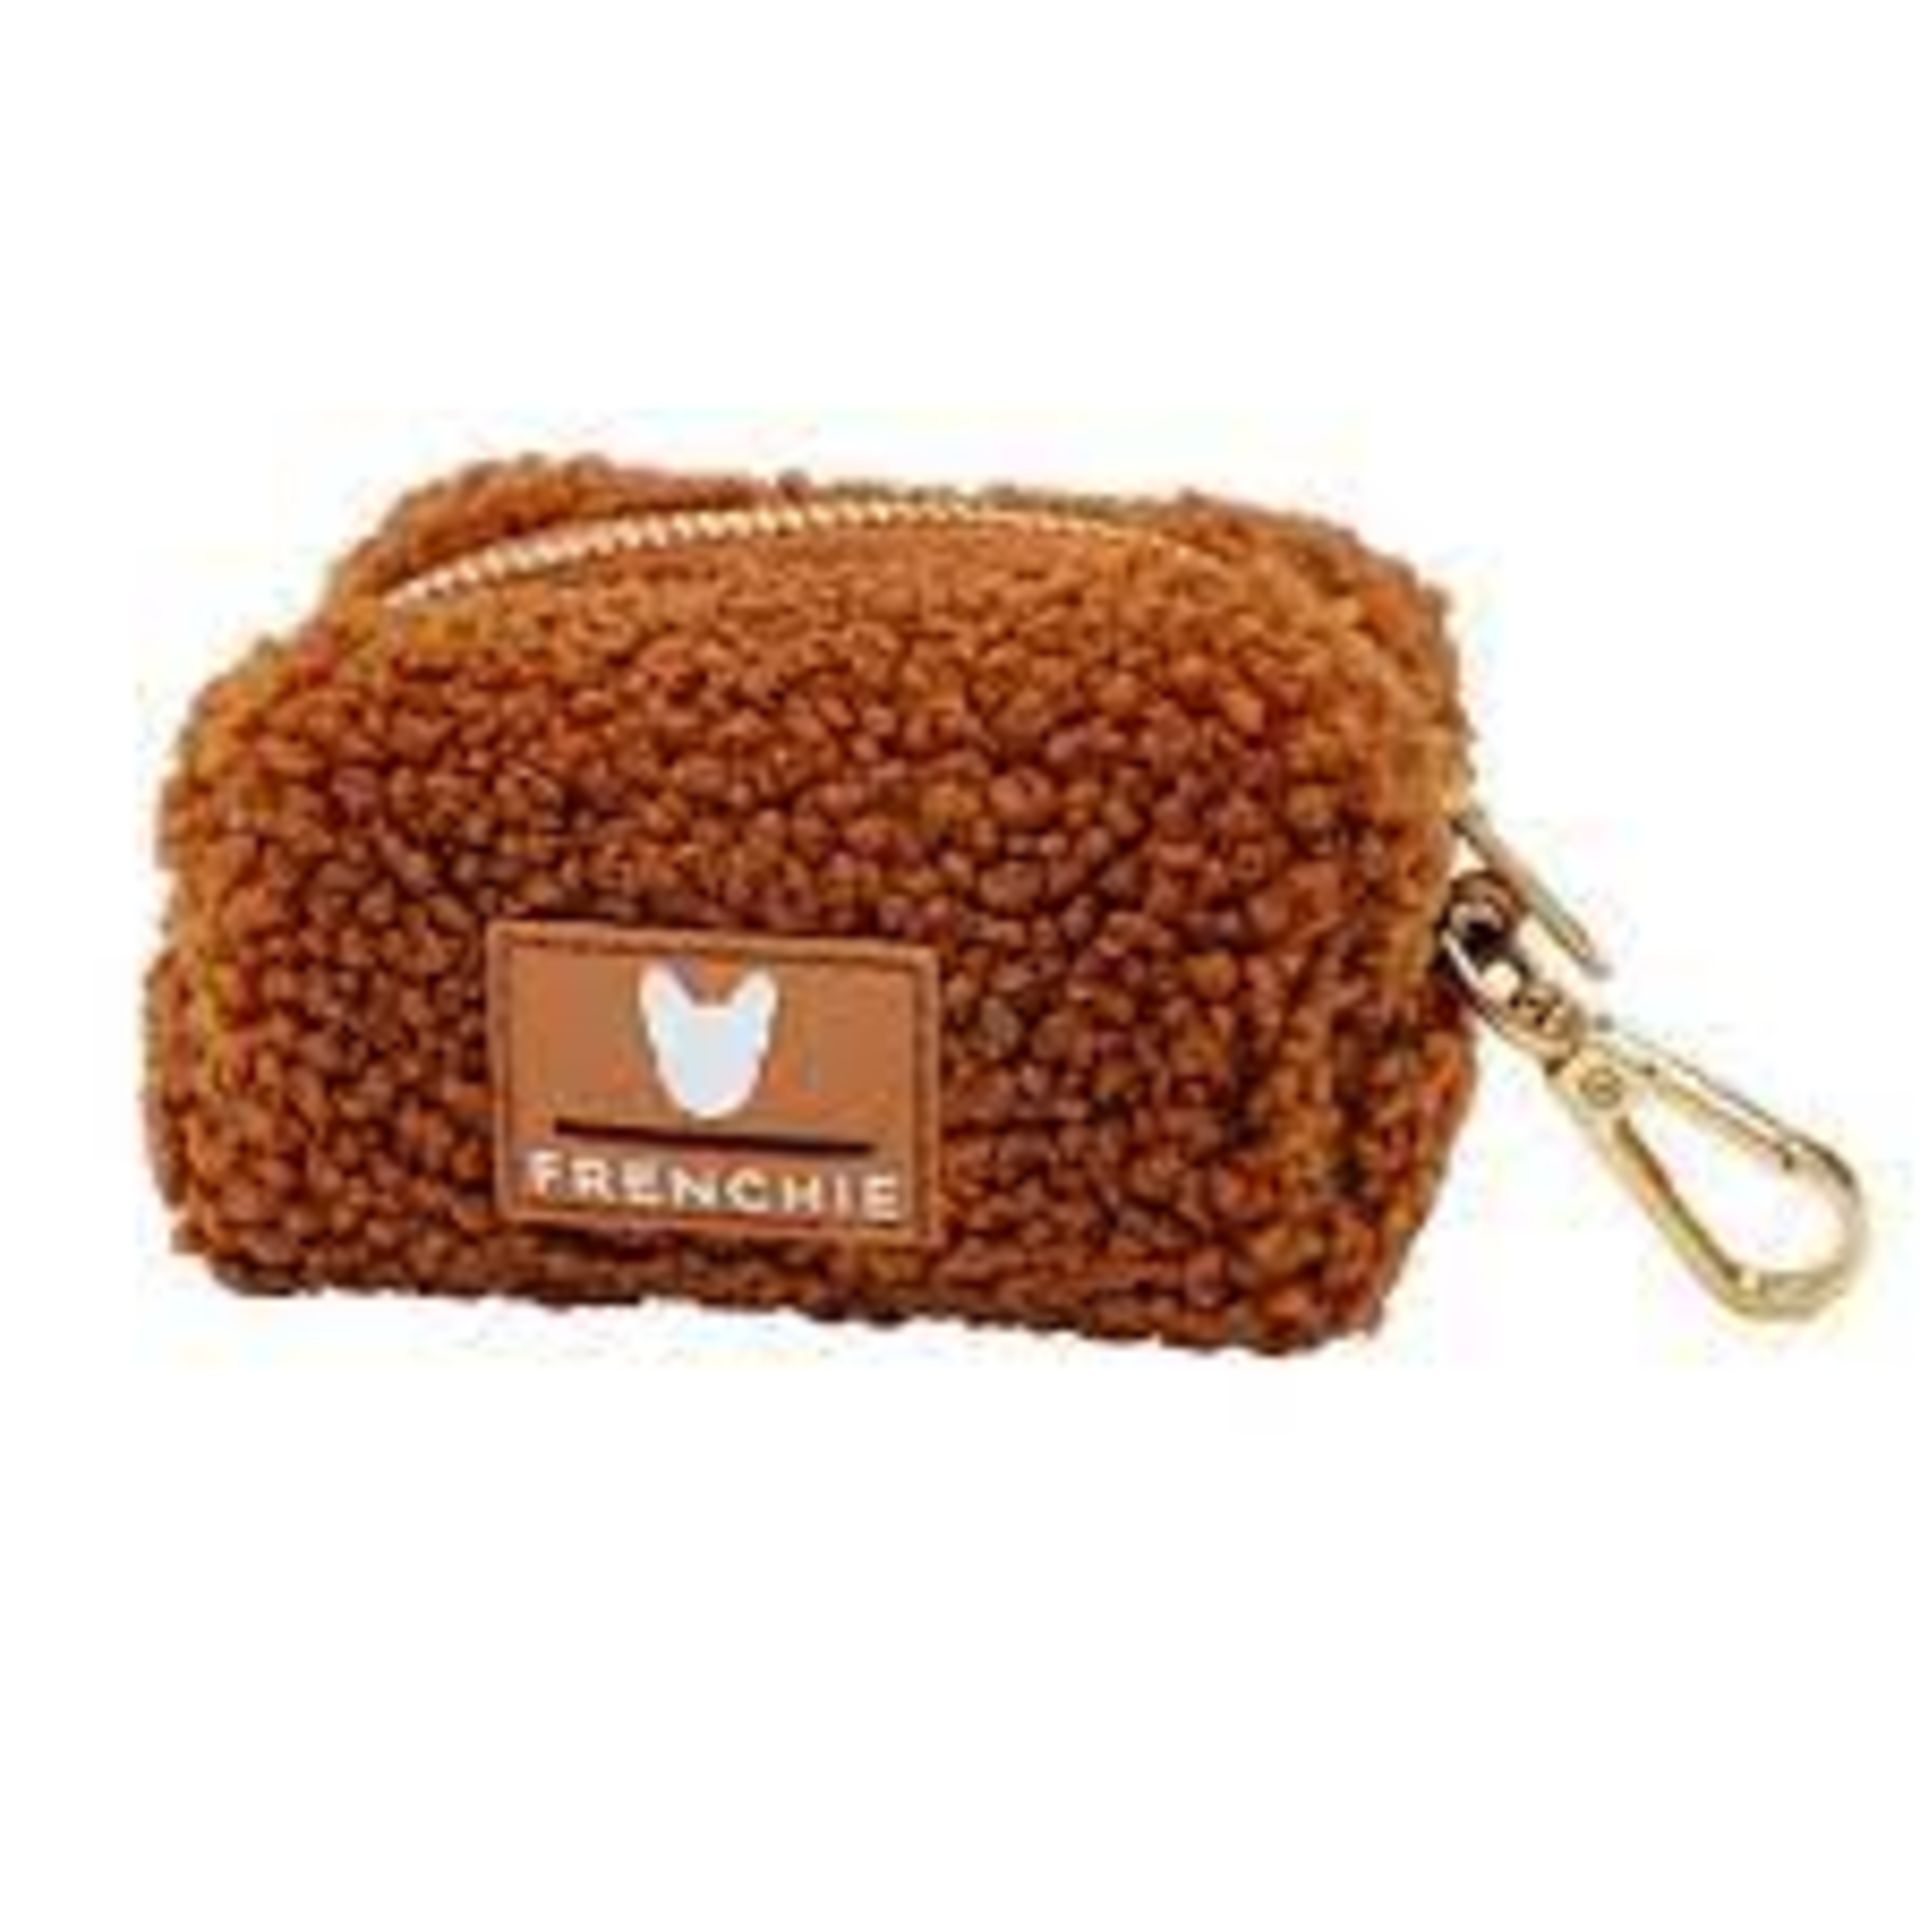 Bulk Trade Lot 500 X New .Packaged Frenchie The Bulldog Luxury Branded Dog Products. May include - Image 26 of 50